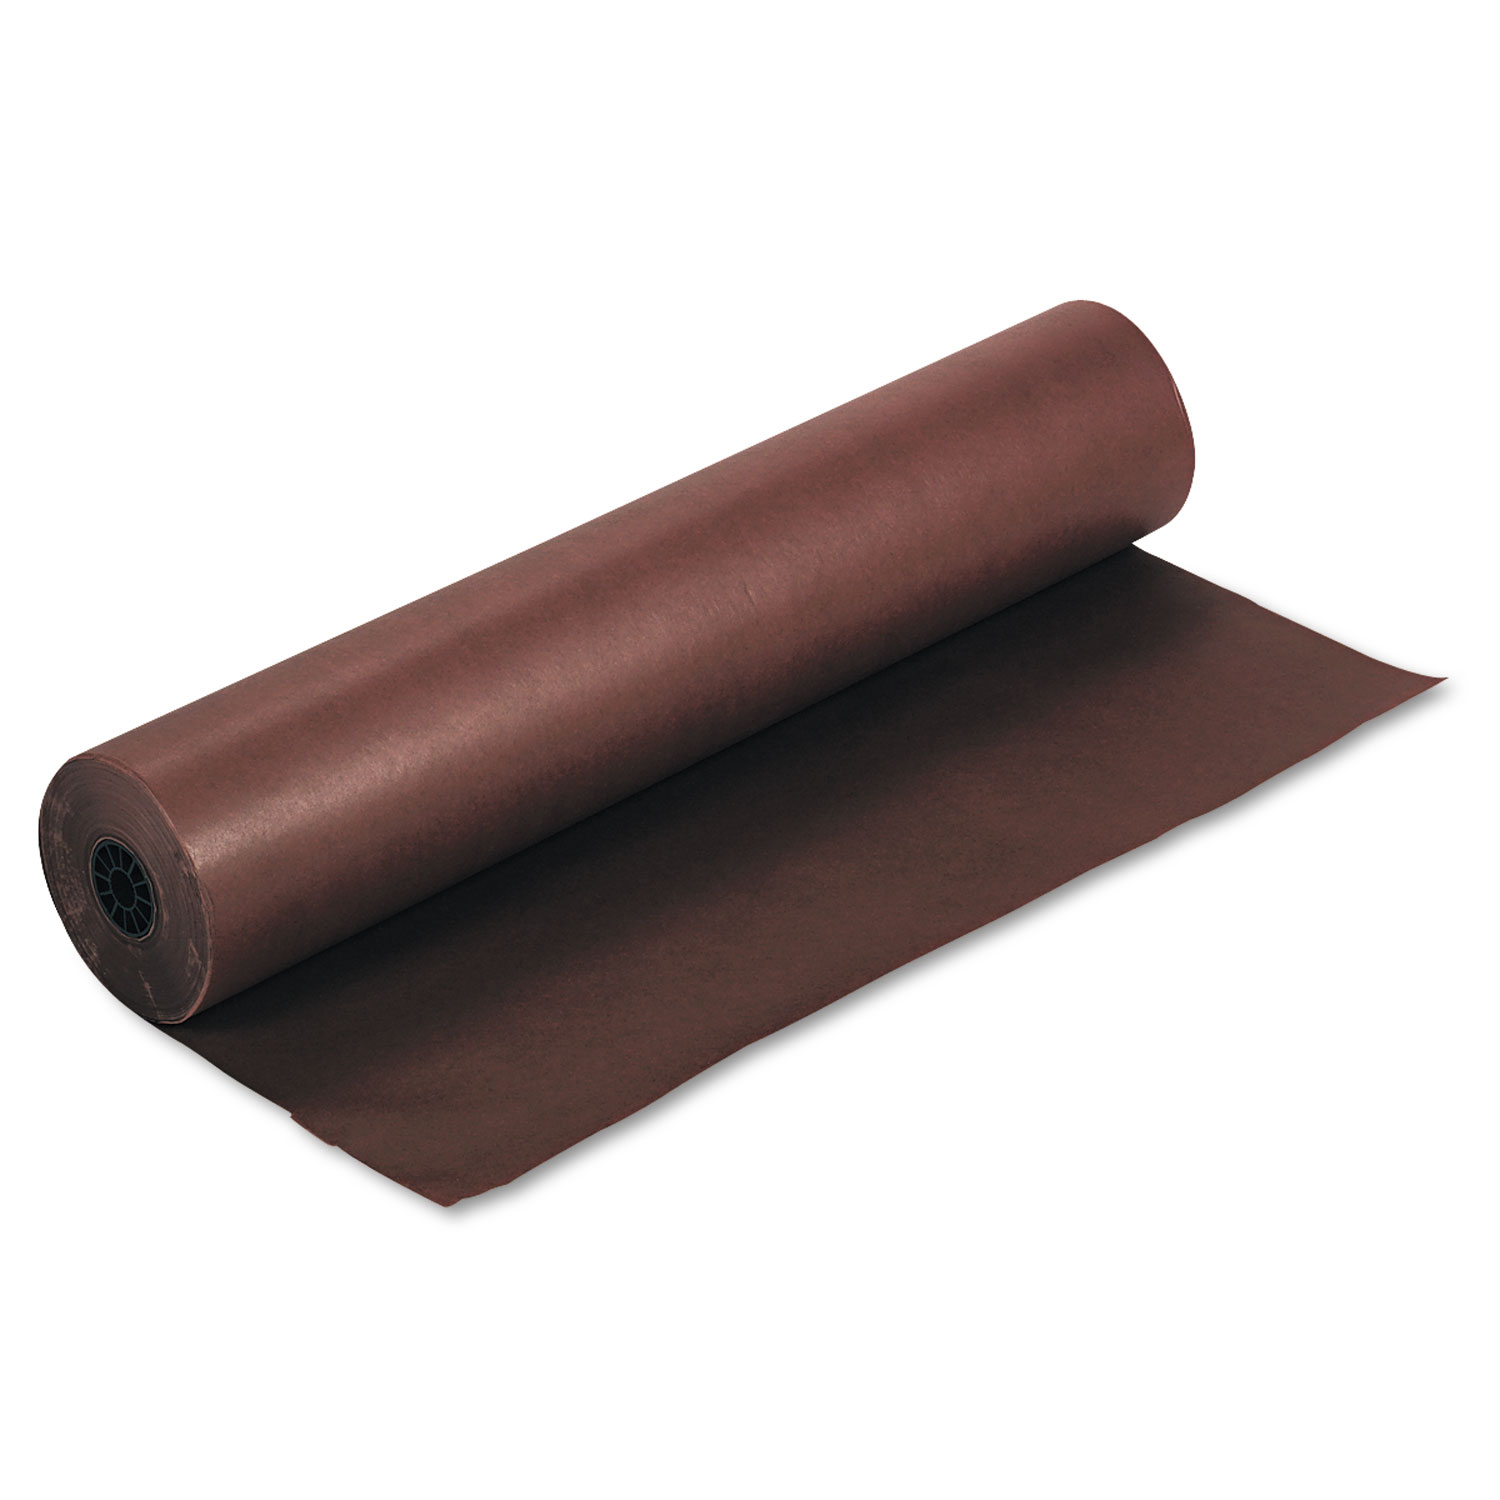  Pacon 63020 Rainbow Duo-Finish Colored Kraft Paper, 35lb, 36 x 1000ft, Brown (PAC63020) 